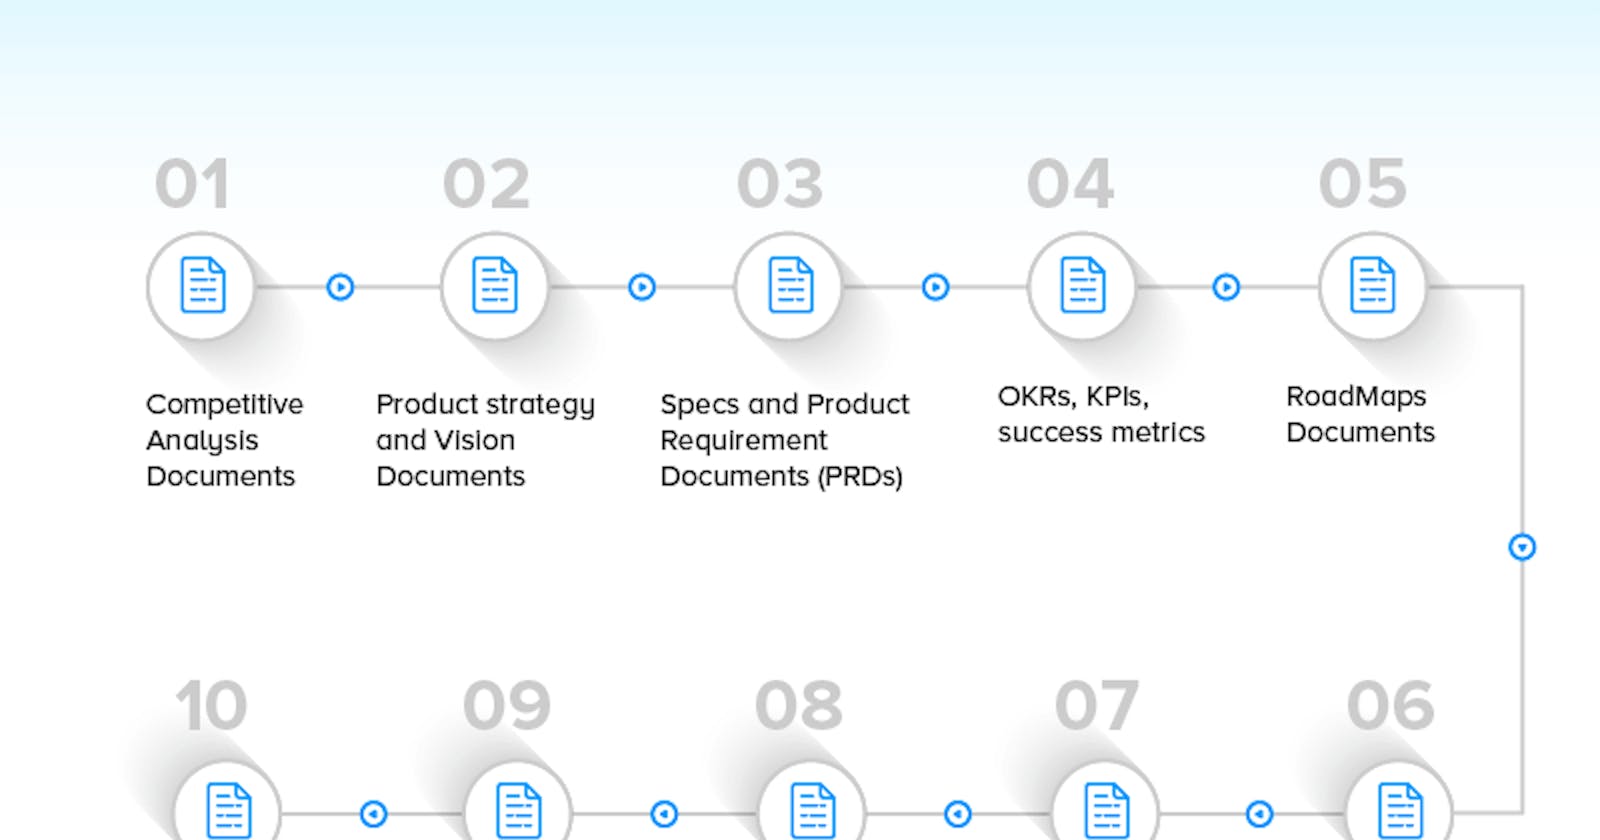 5 Most Important Technical Documents for Every Product Manager